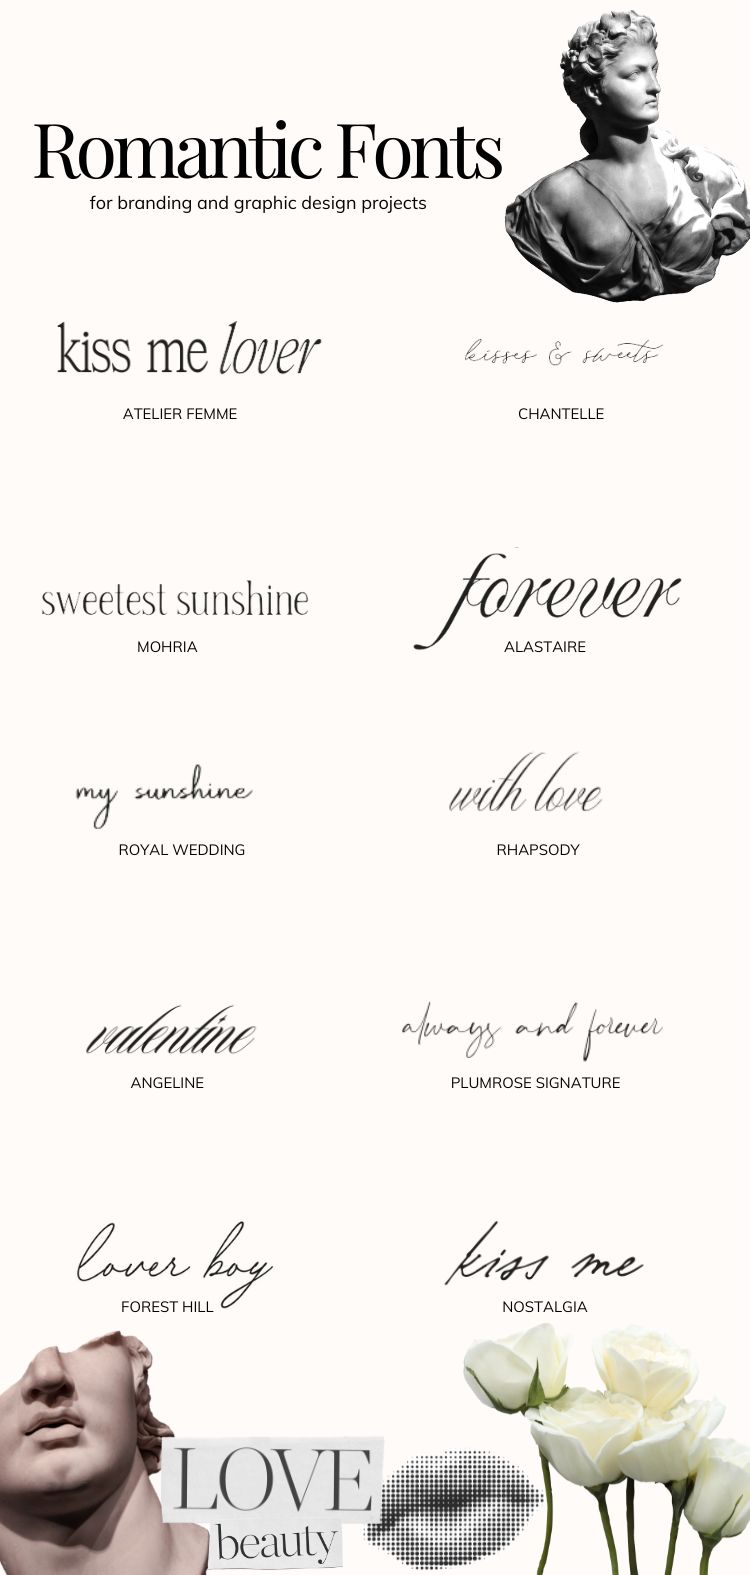 Are you looking to add a romantic element to your branding and graphic design projects? Look no further than these romantic fonts, perfect for adding that extra touch of love and romance to your projects. Whether you are wanting to add a touch of whimsical charm or evoke a feeling of unrequited love, these fonts will provide the perfect backdrop for your design.